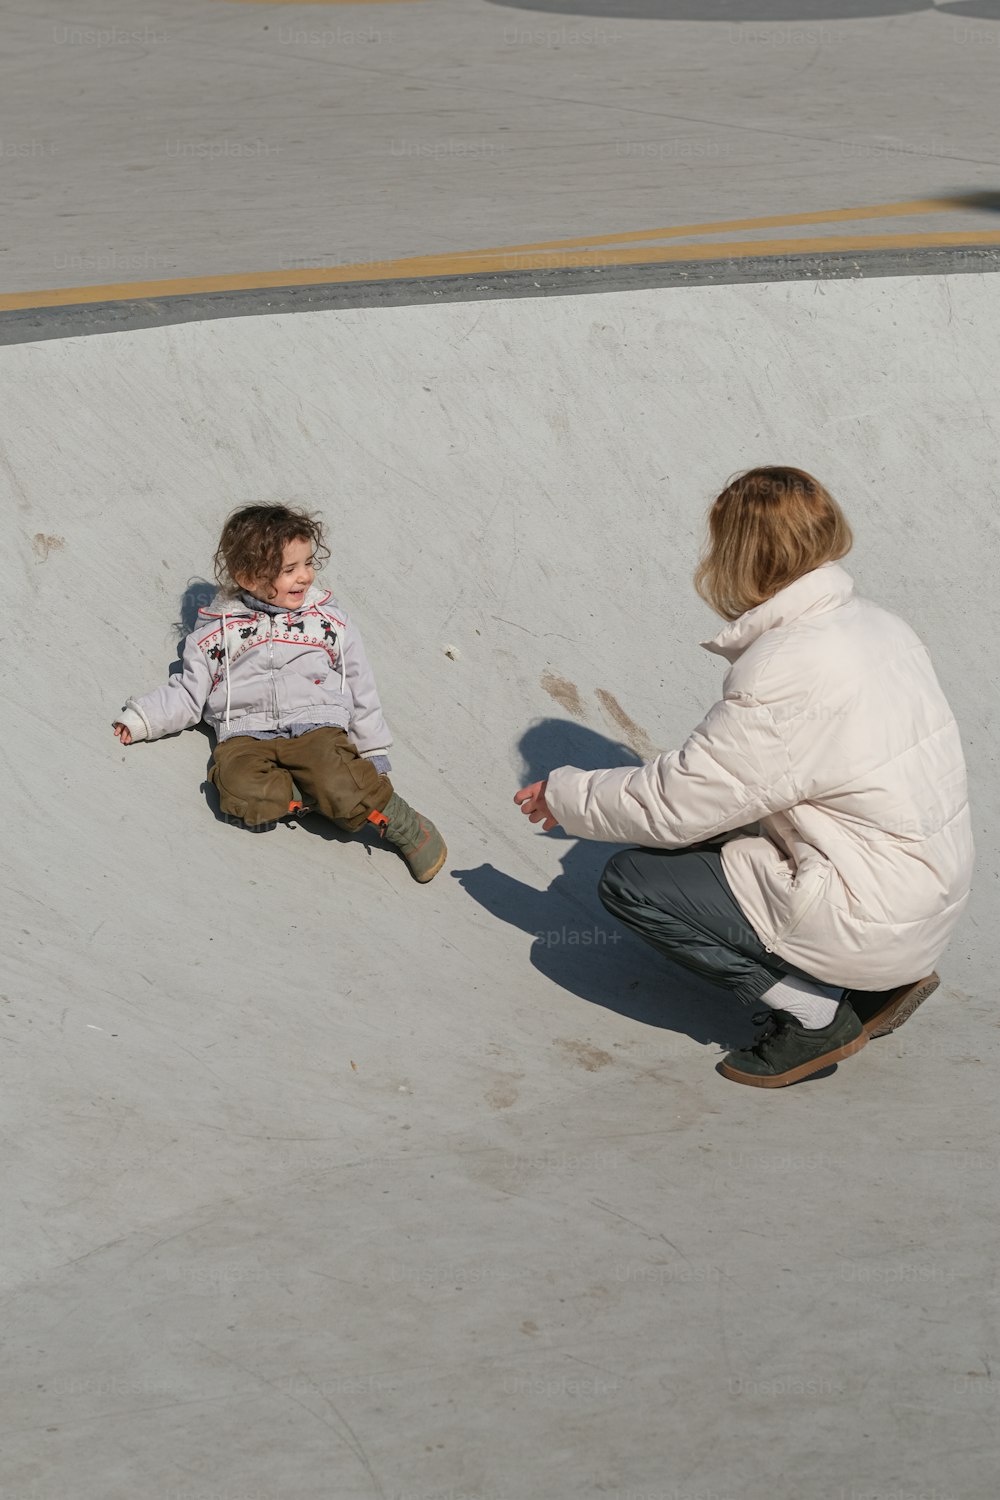 a woman kneeling down next to a child on a skateboard